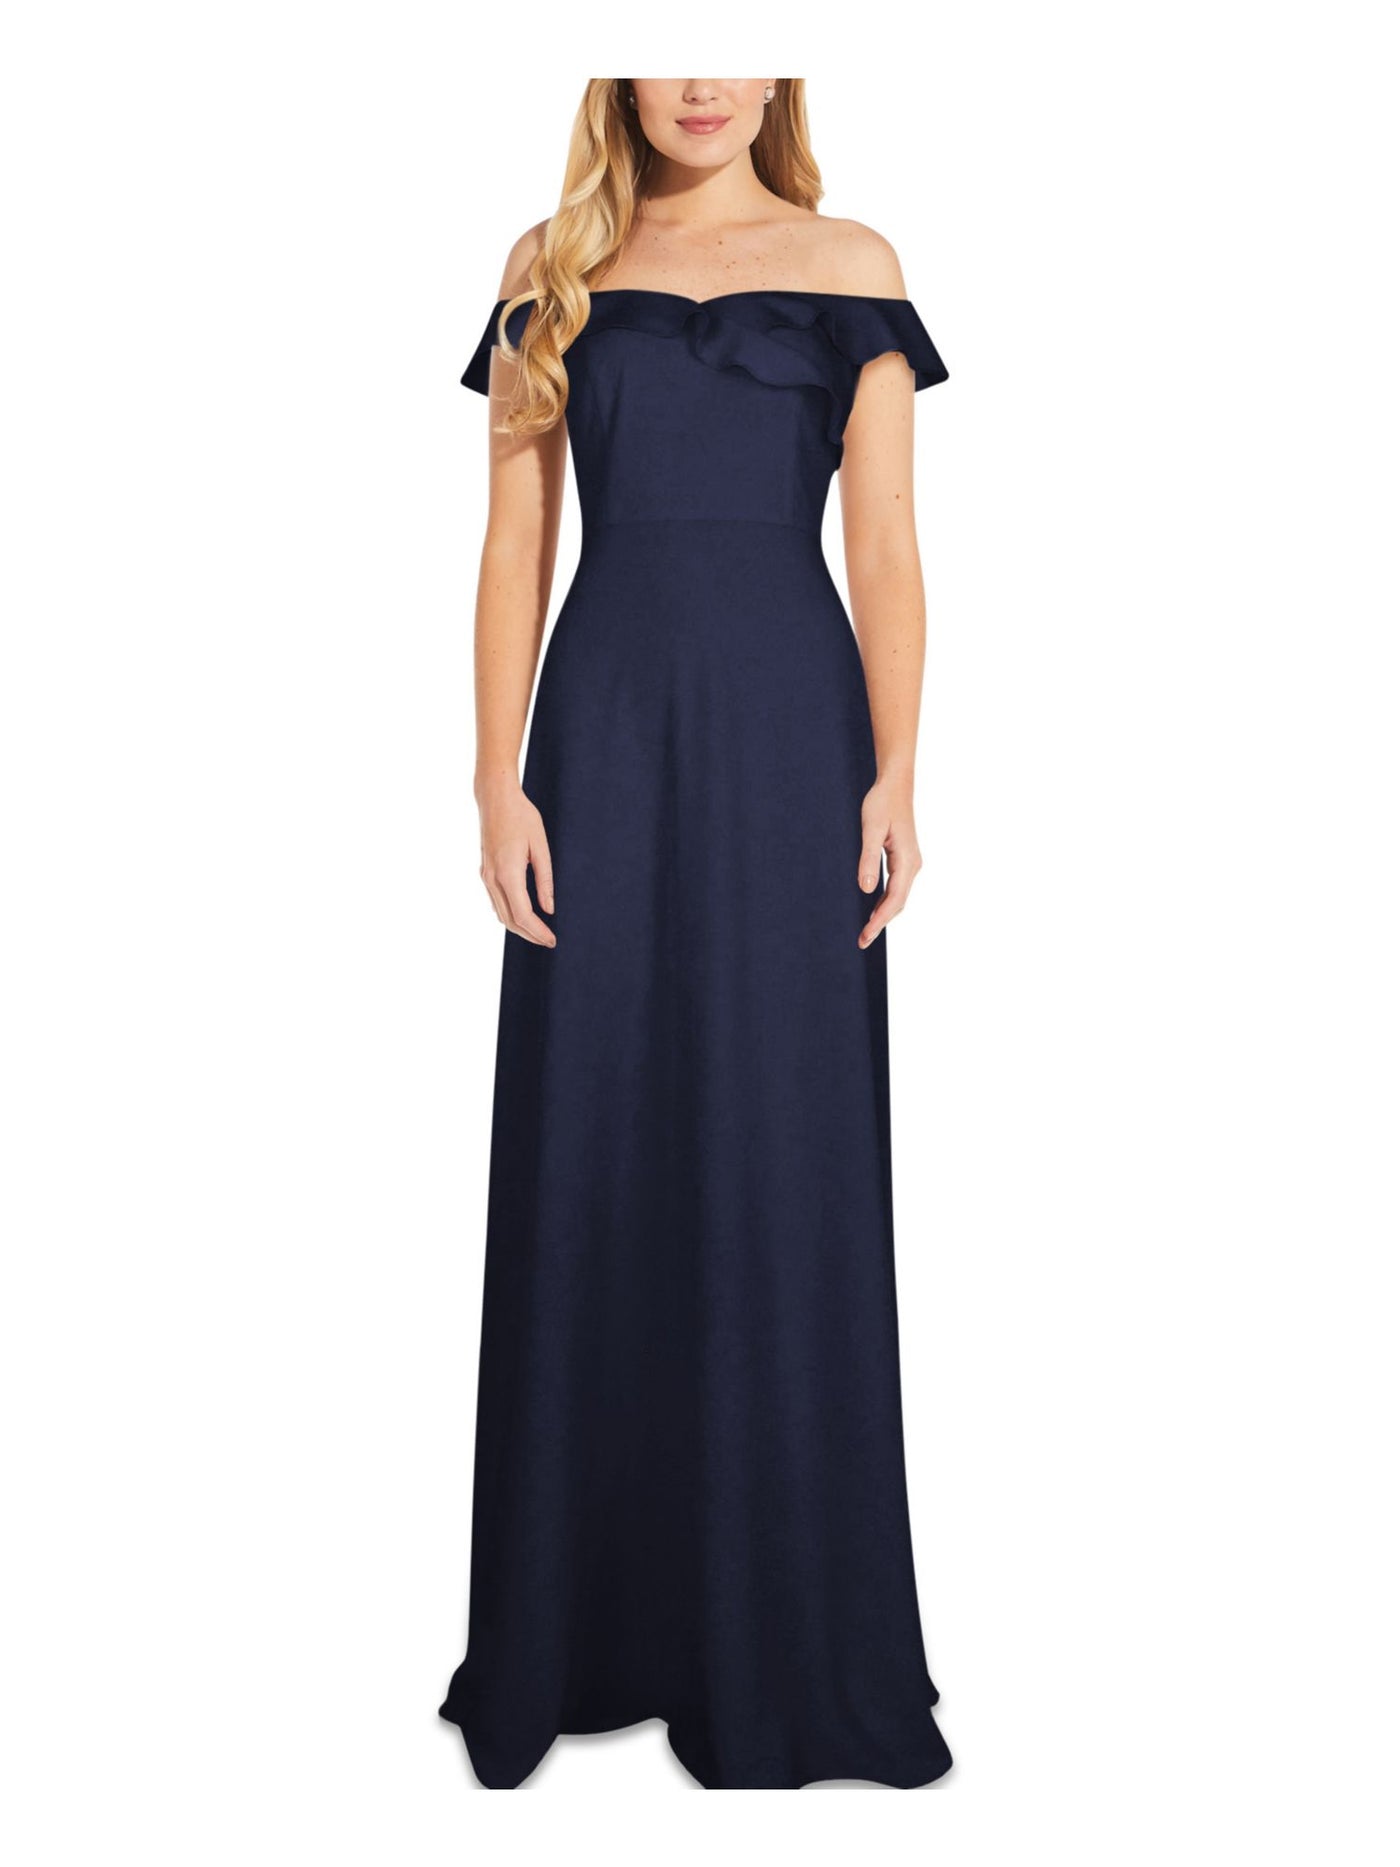 ADRIANNA PAPELL Womens Navy Ruffled Zippered Gown Lined Sleeveless Off Shoulder Full-Length Formal Sheath Dress 6